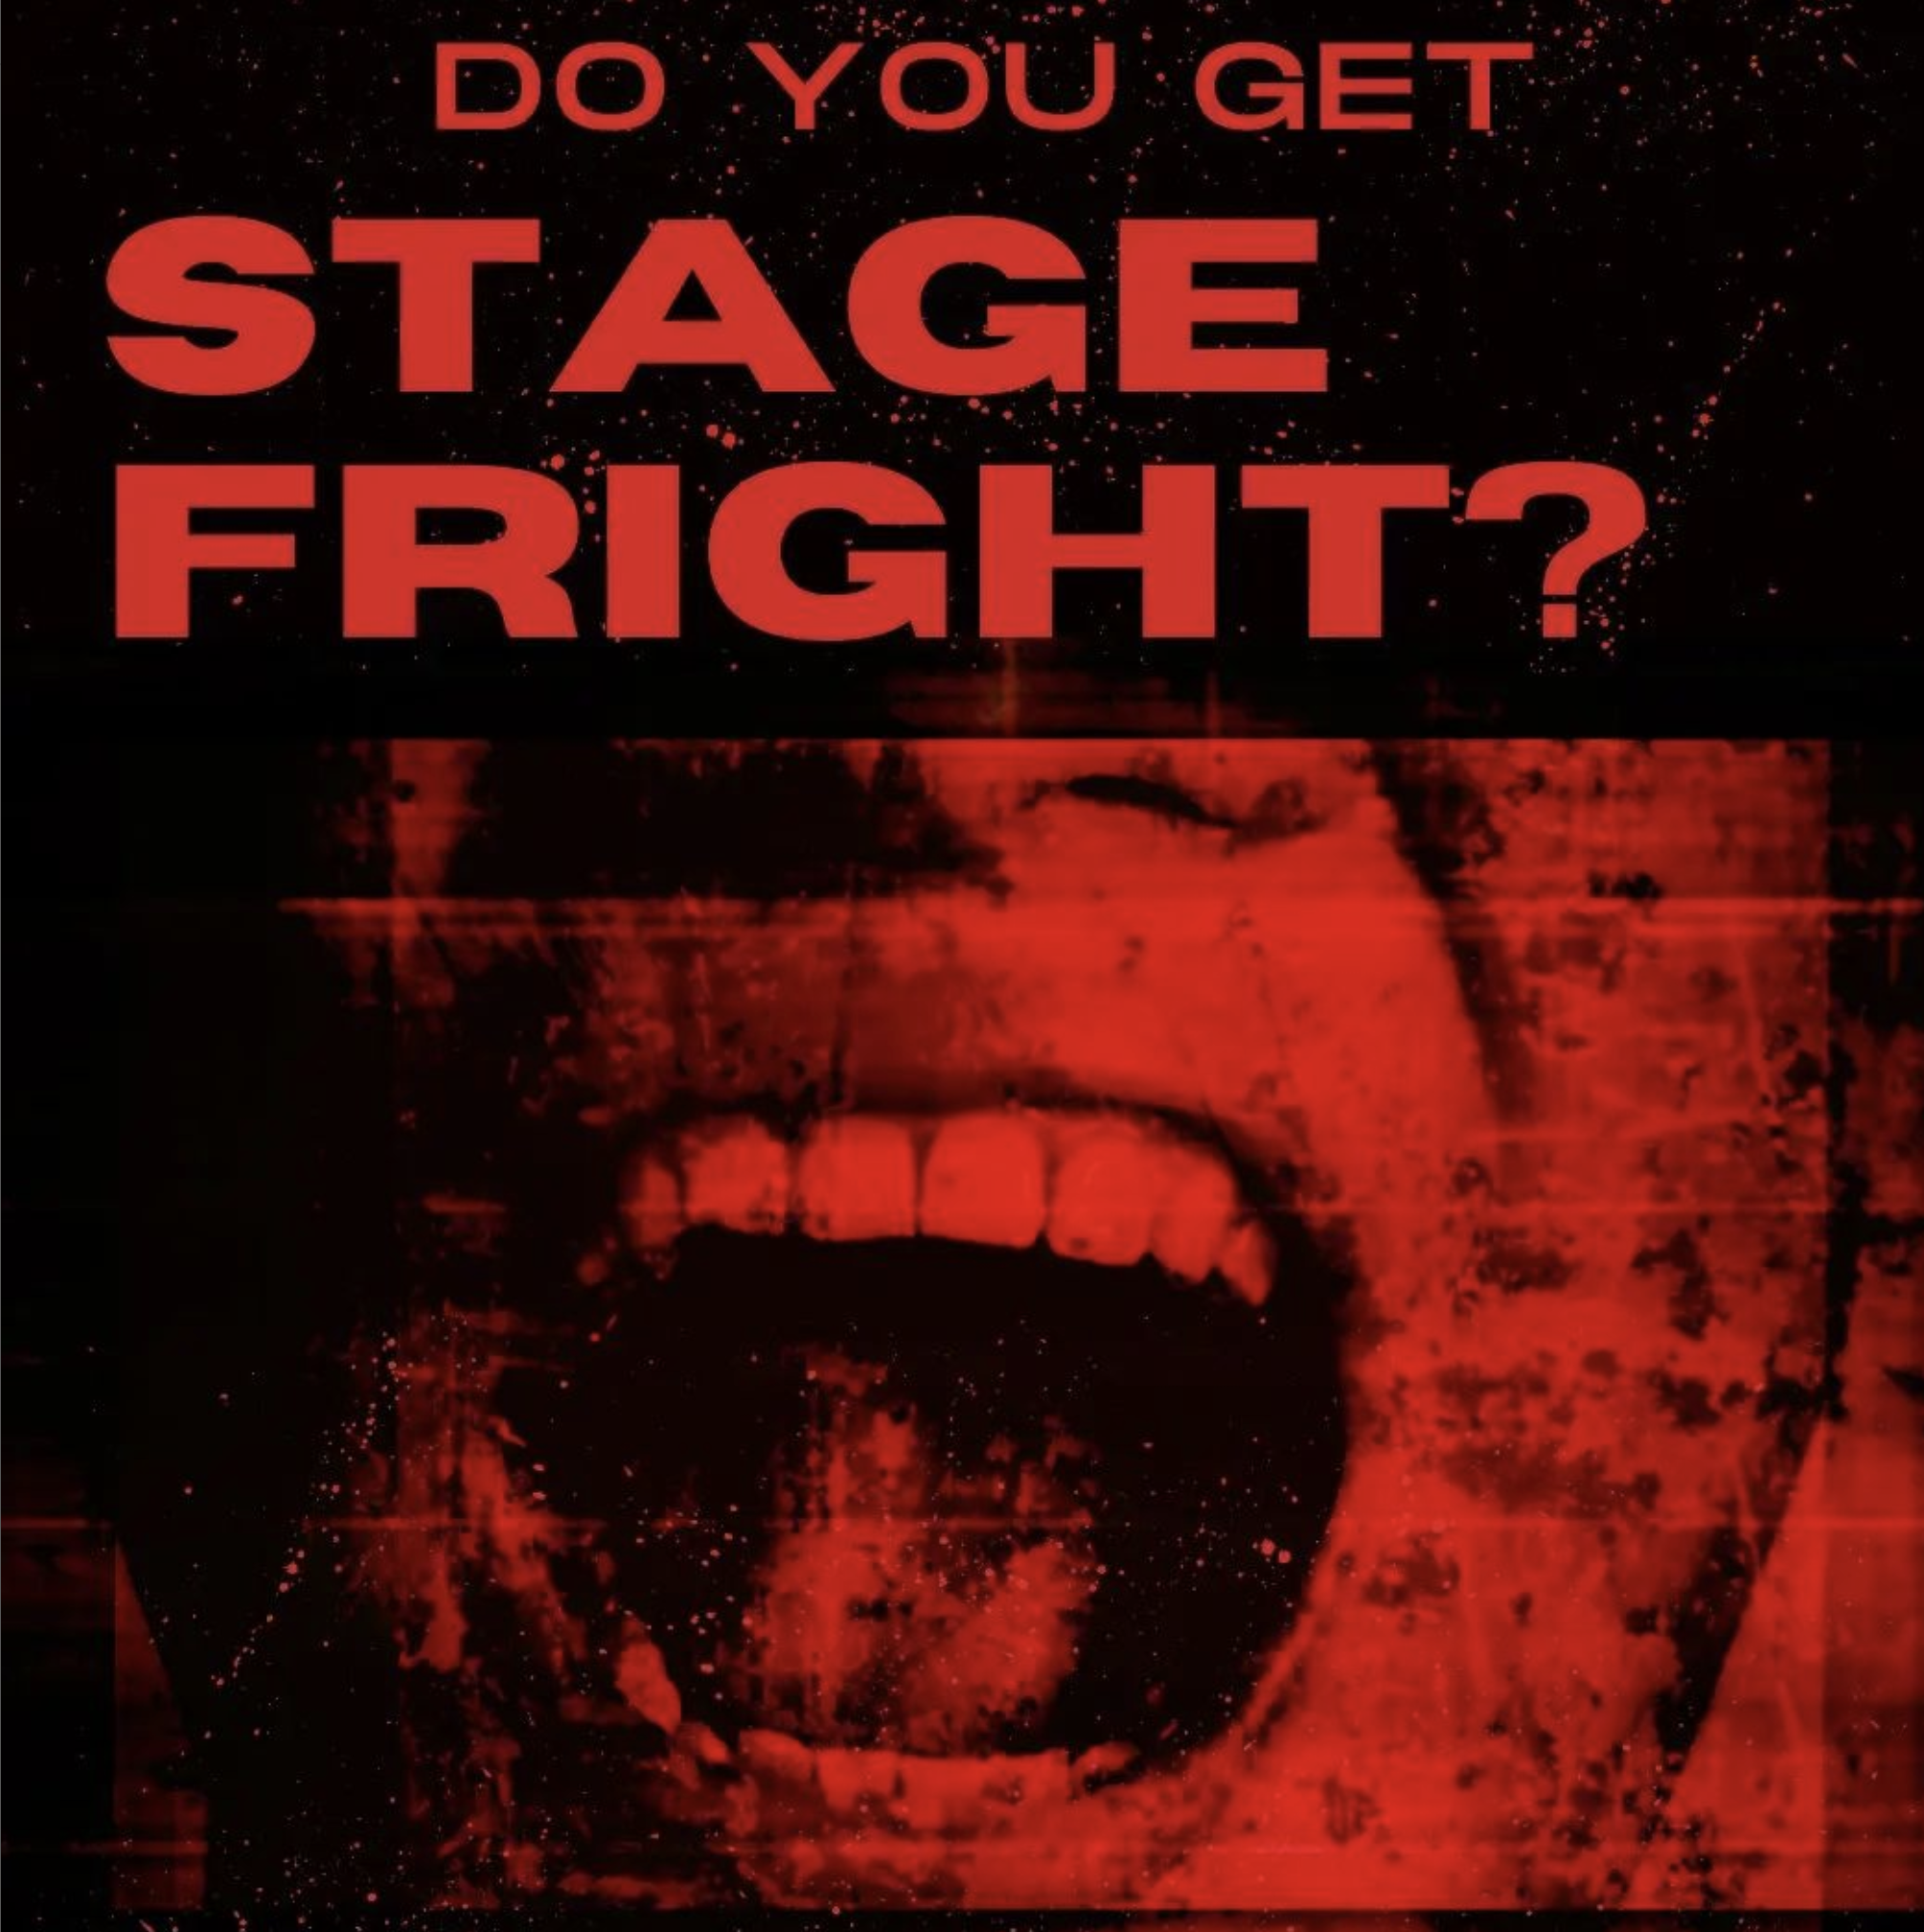 Stage fright and speech